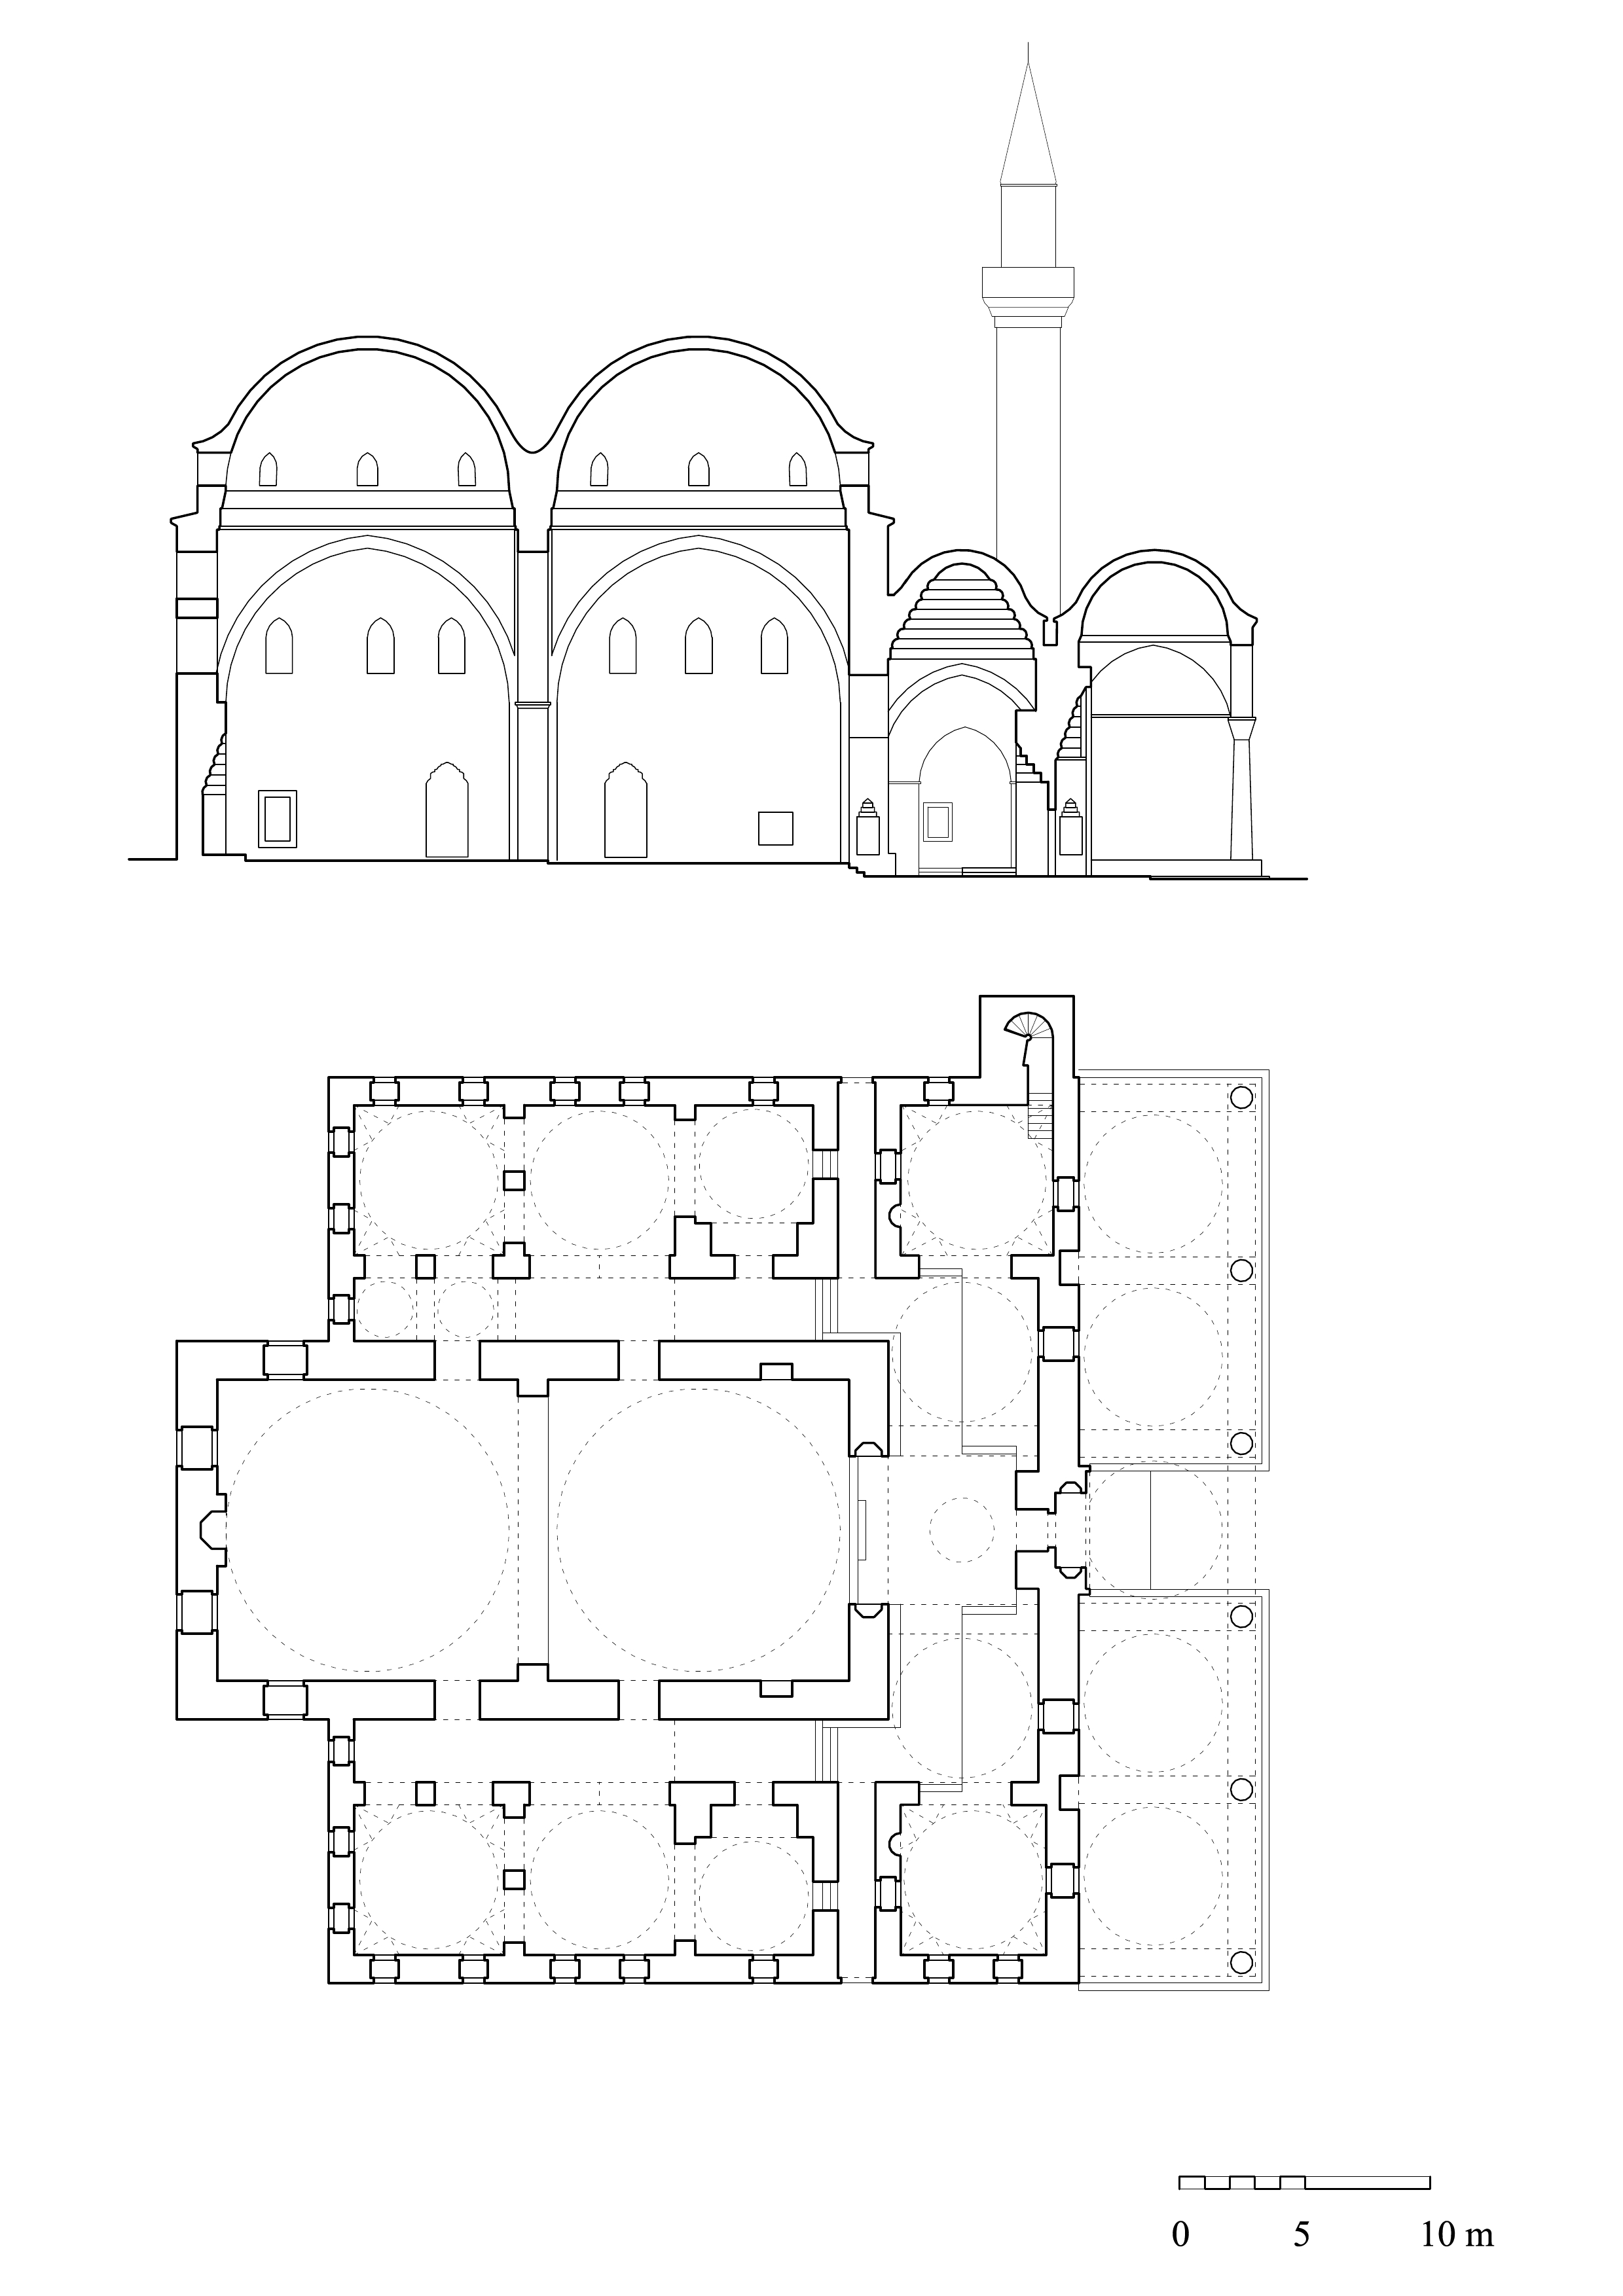 Floor plan and section of Mahmud Pasa Complex